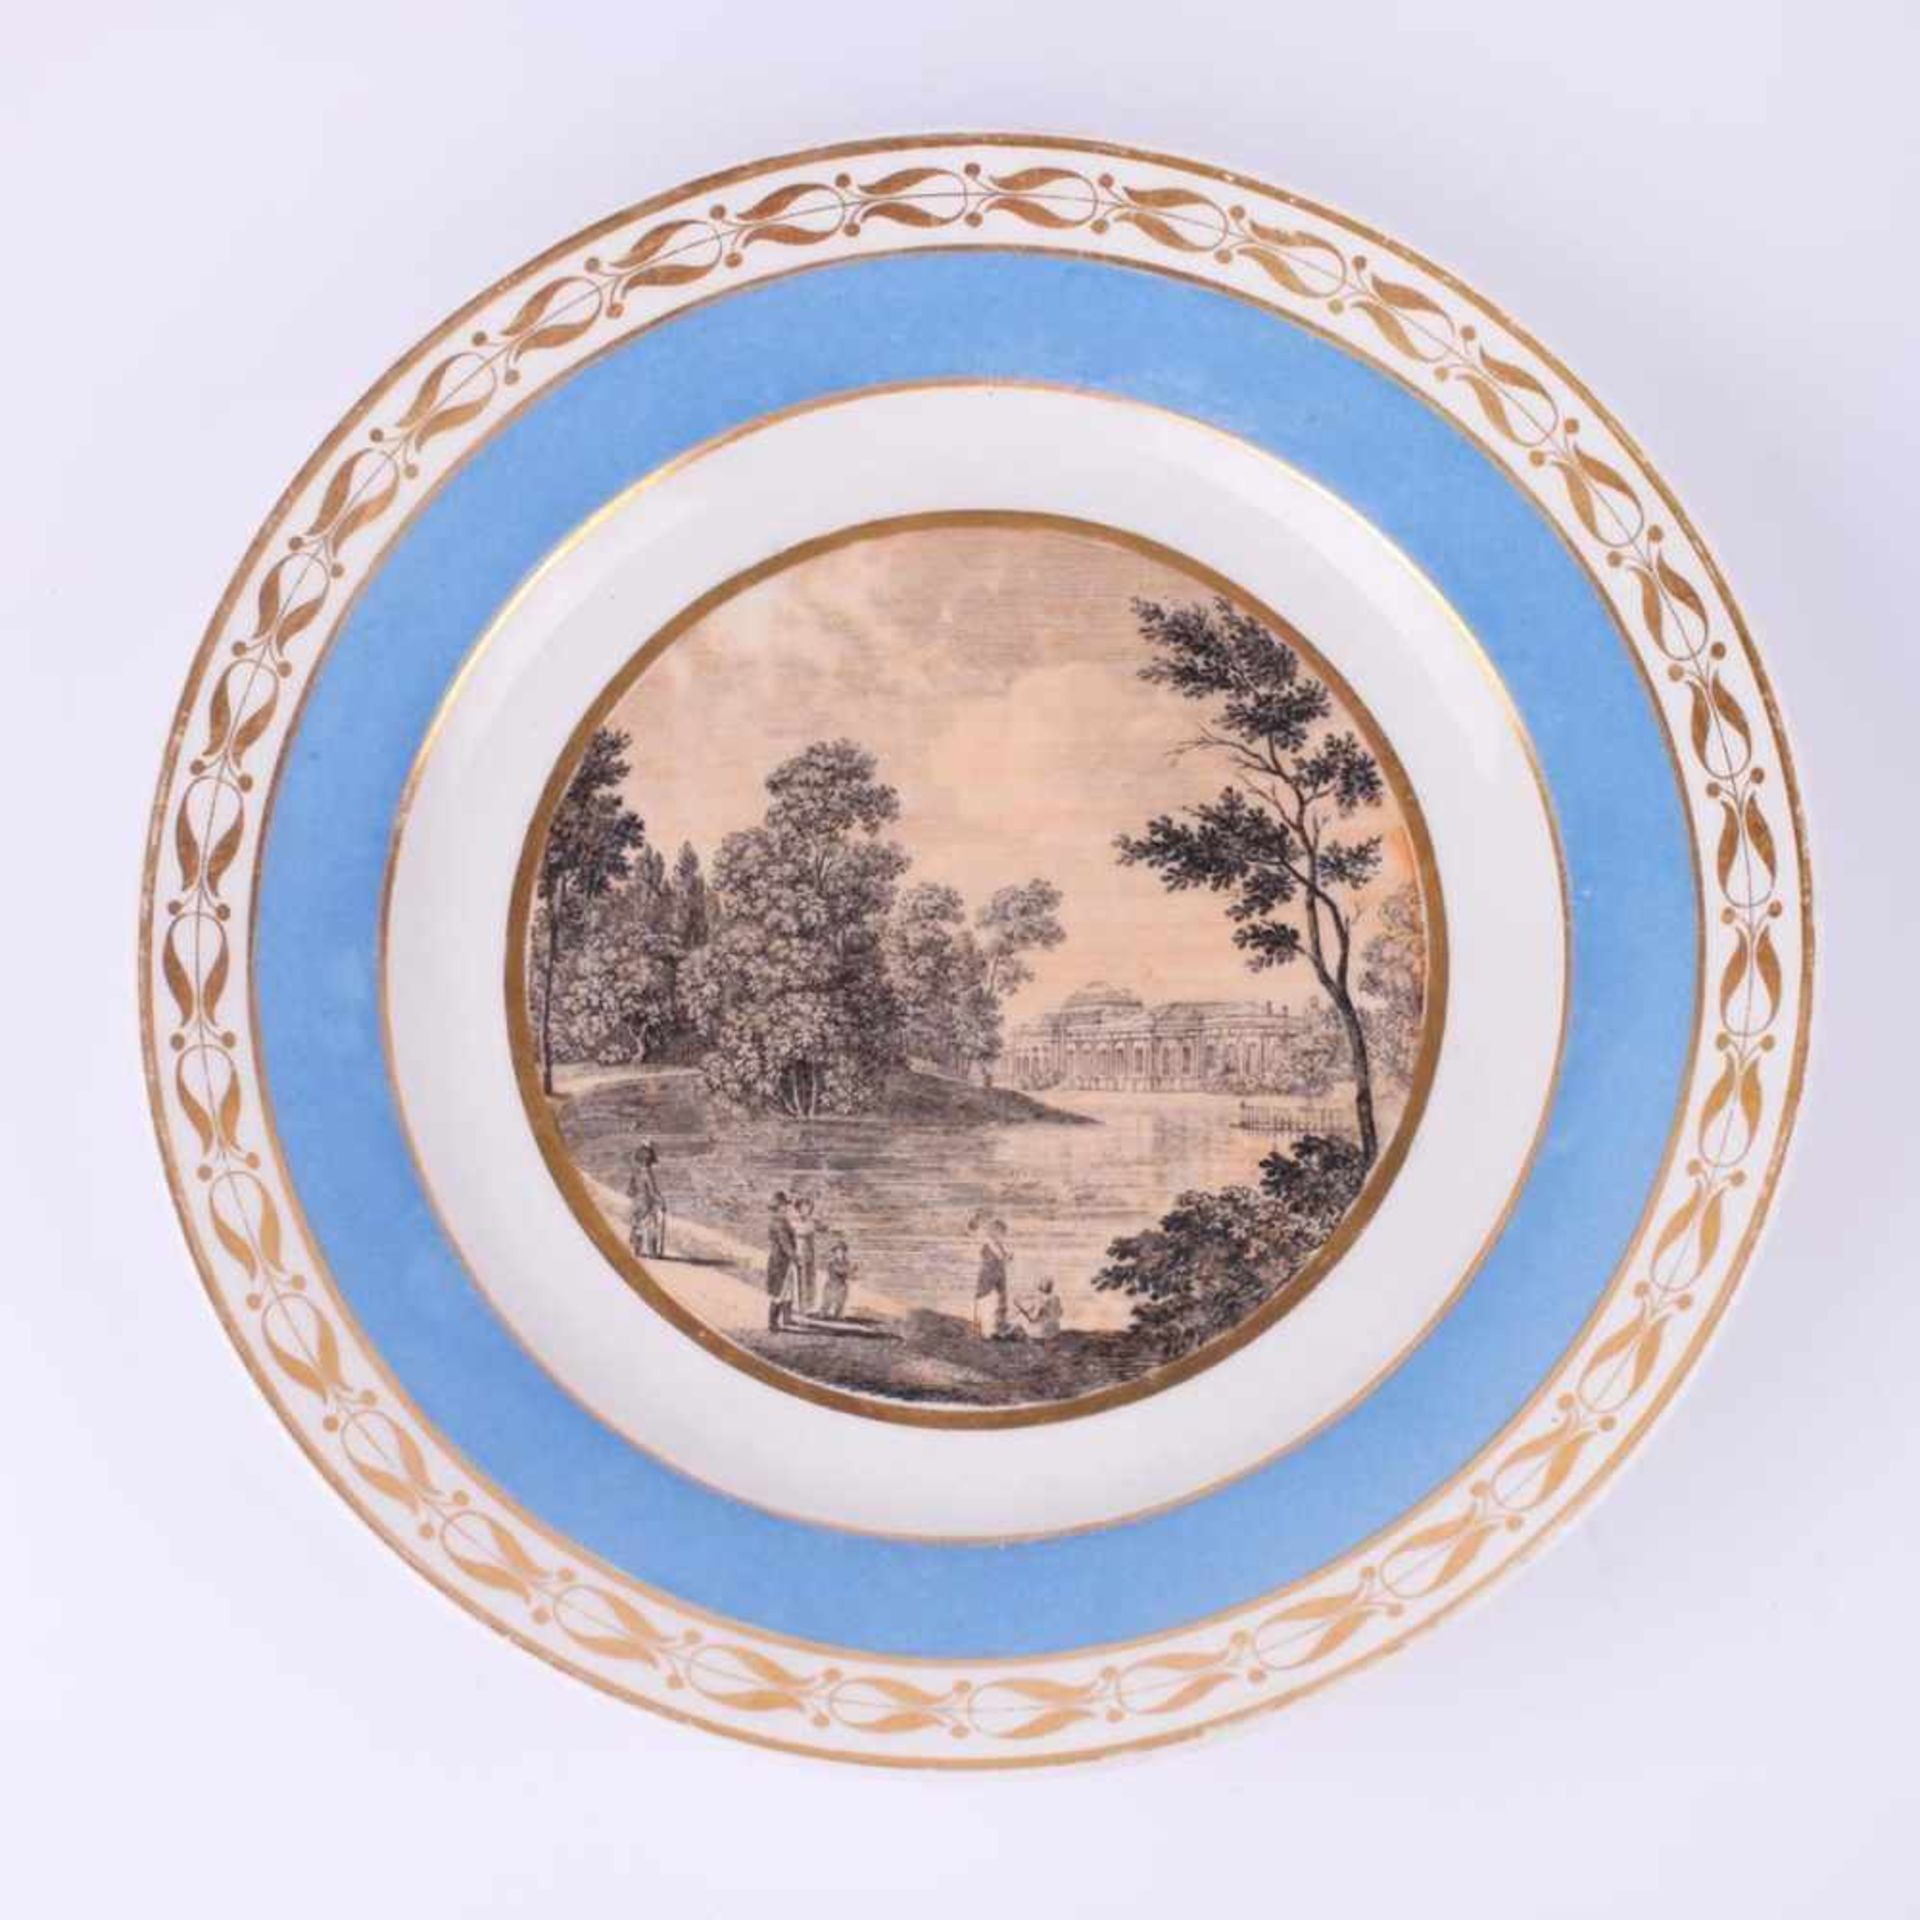 Decorative plate with a landscape scene. IFZ. [Early XIX century].Russia. Porcelain, decal, gilding.